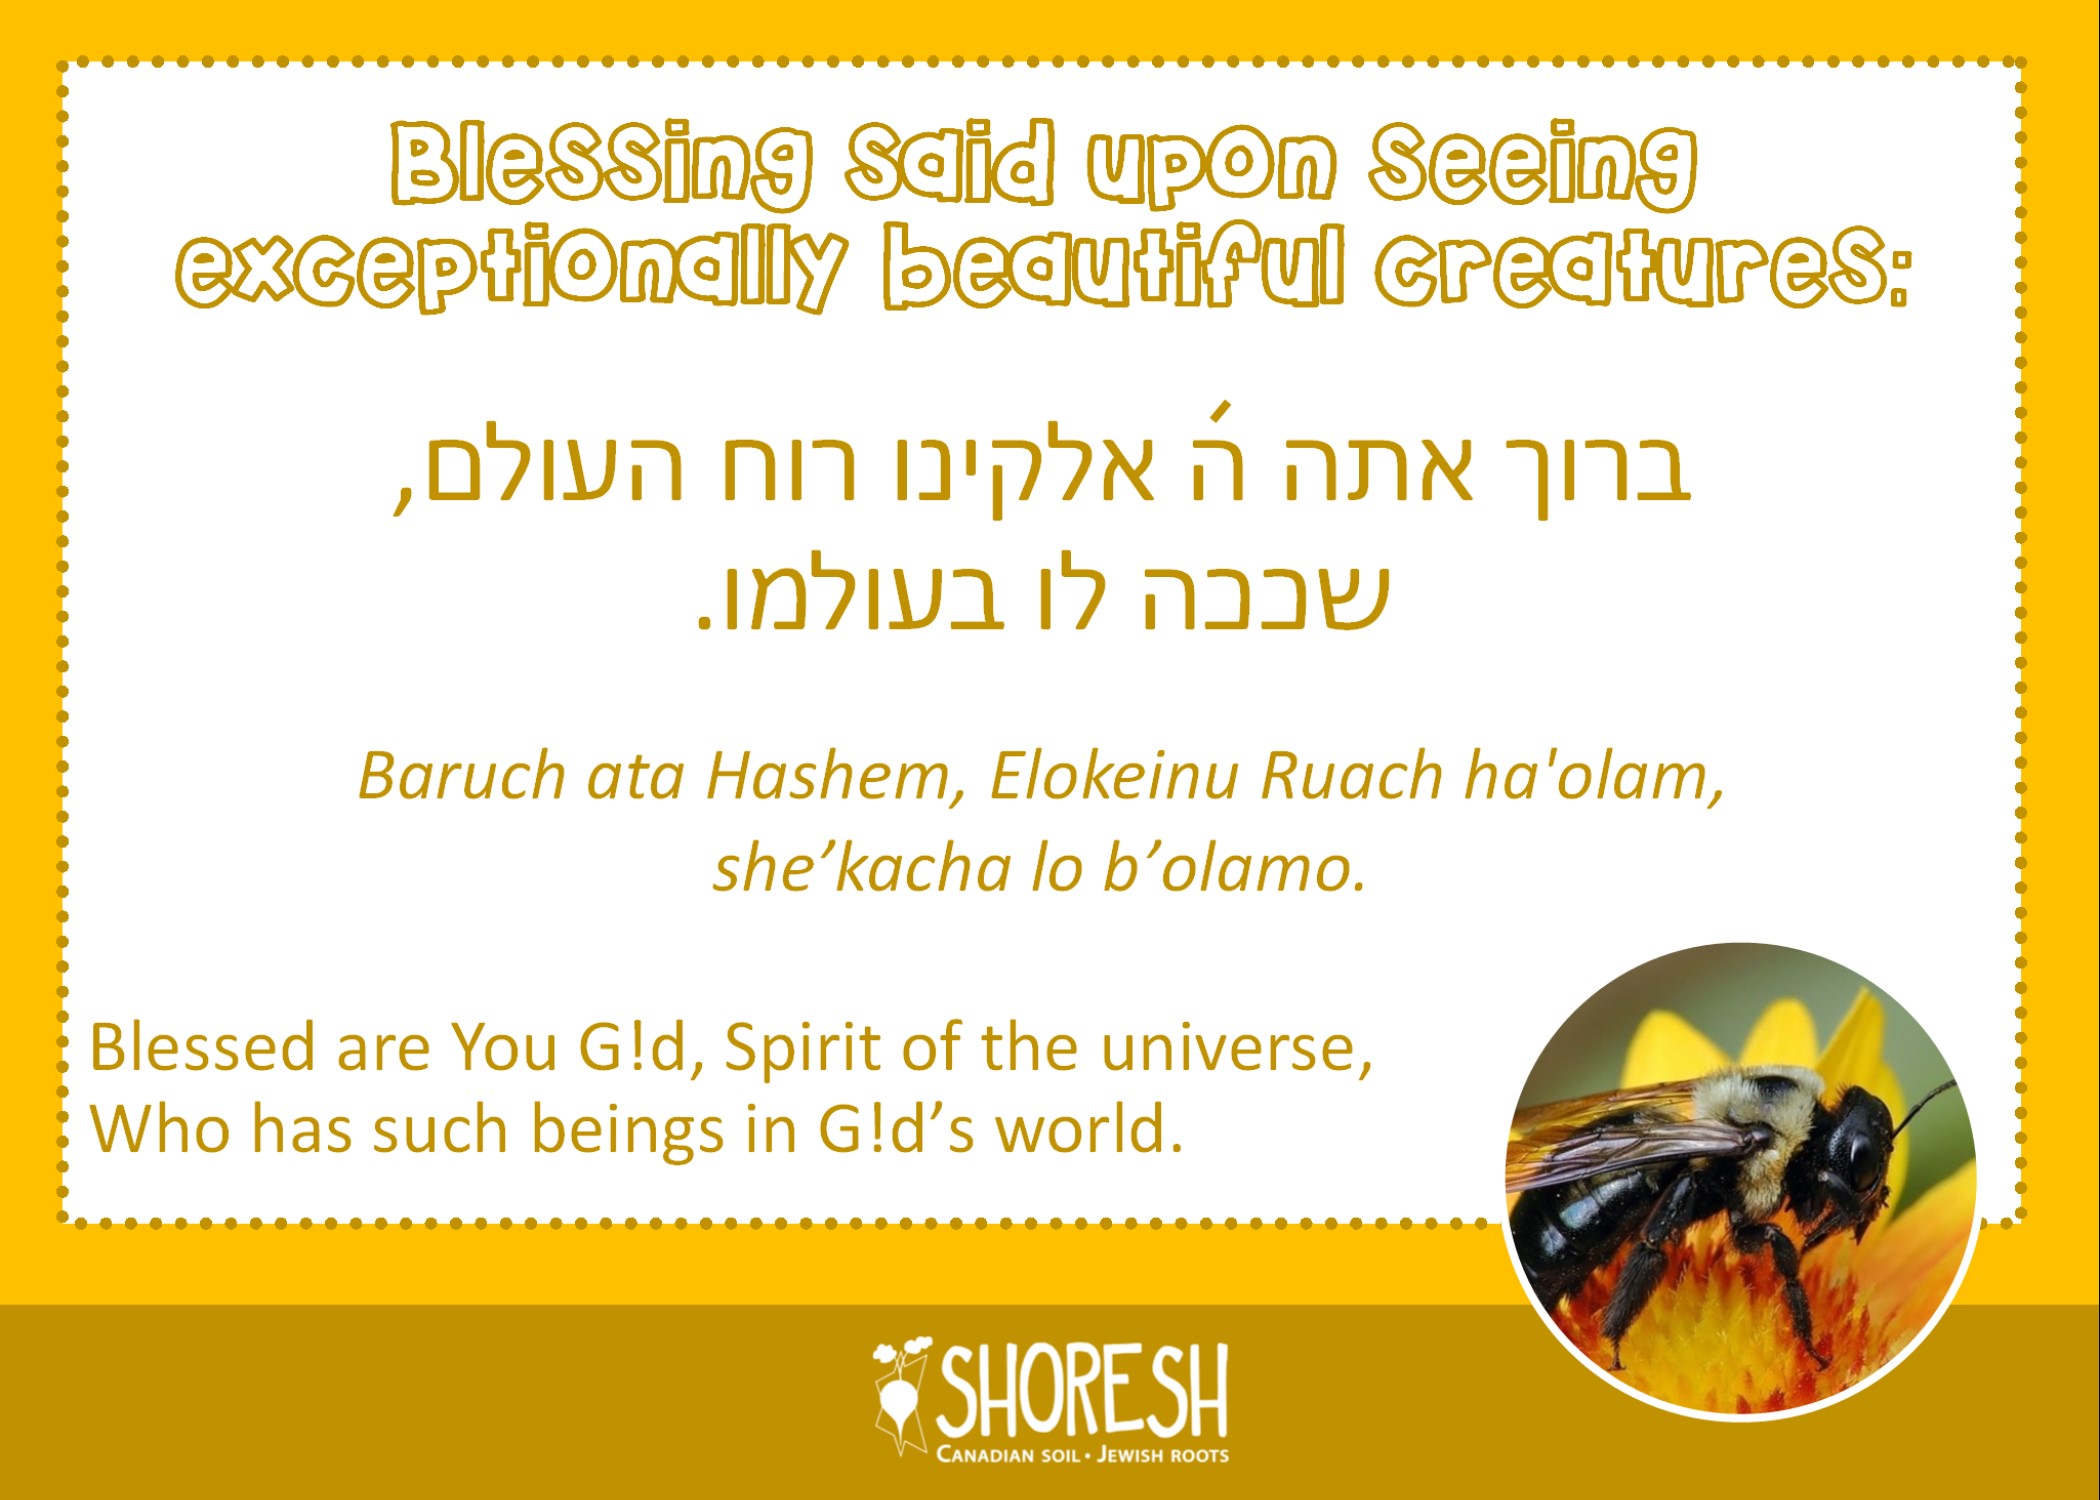 Blessing said upon seeing exceptionally beautiful creatures: ברוך אתה ה אלקינו רוח העולם, שככה לו בעולמו. Baruch ata Hashem, Elokeinu Ruach ha'olam, she’kacha lo b’olamo. Blessed are You G!d, Spirit of the universe, Who has such beings in G!d’s world.